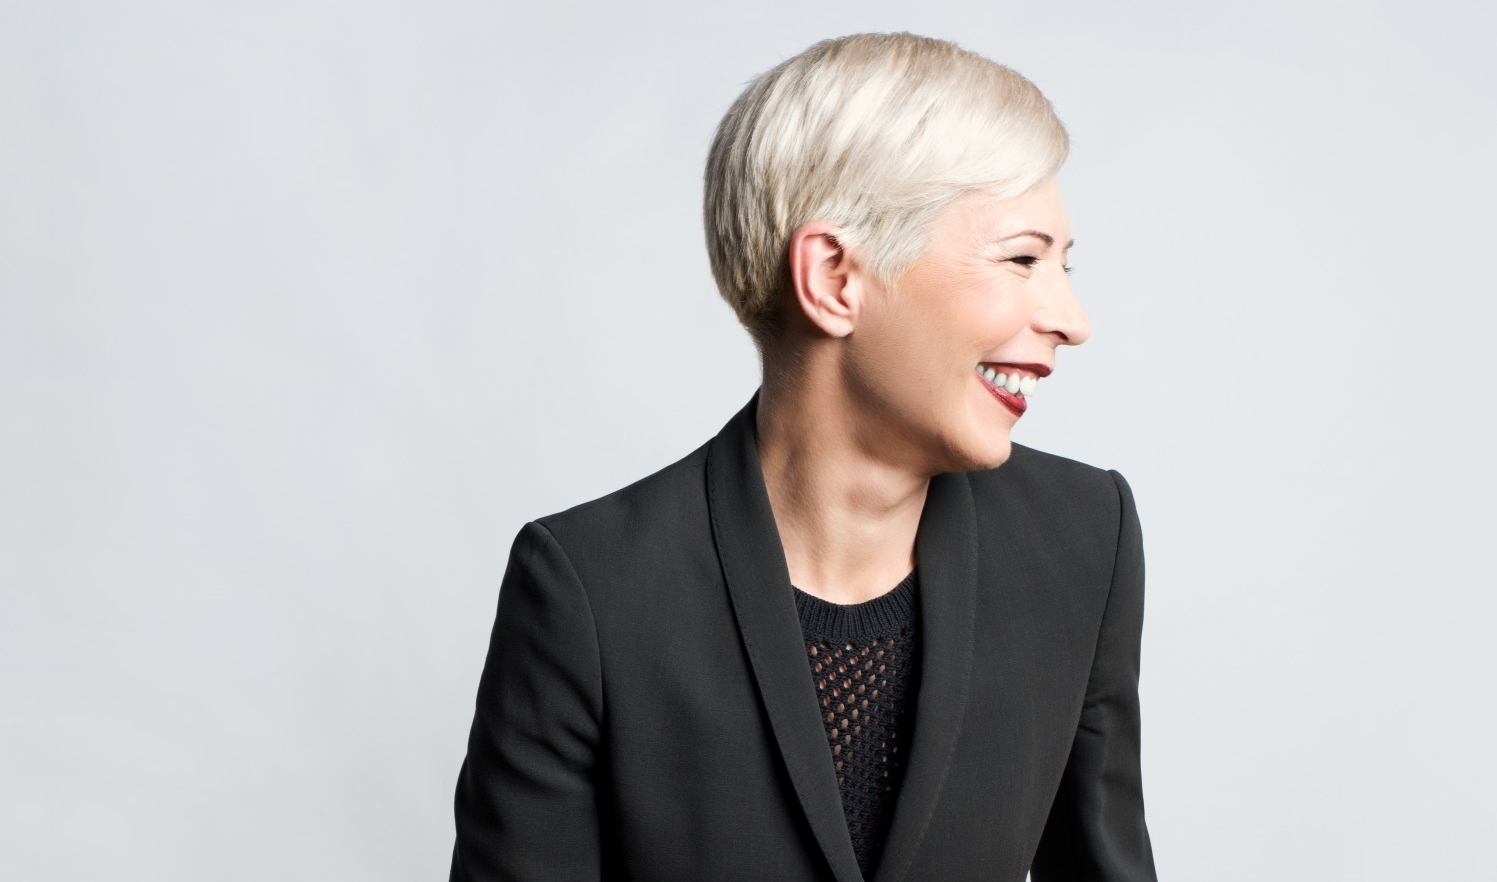 A woman with short, white-blonde hair stands in front of a white backdrop and looks off to the side while smiling. She wears burgundy lipstick, black nail polish, a silver ring and a black suit.